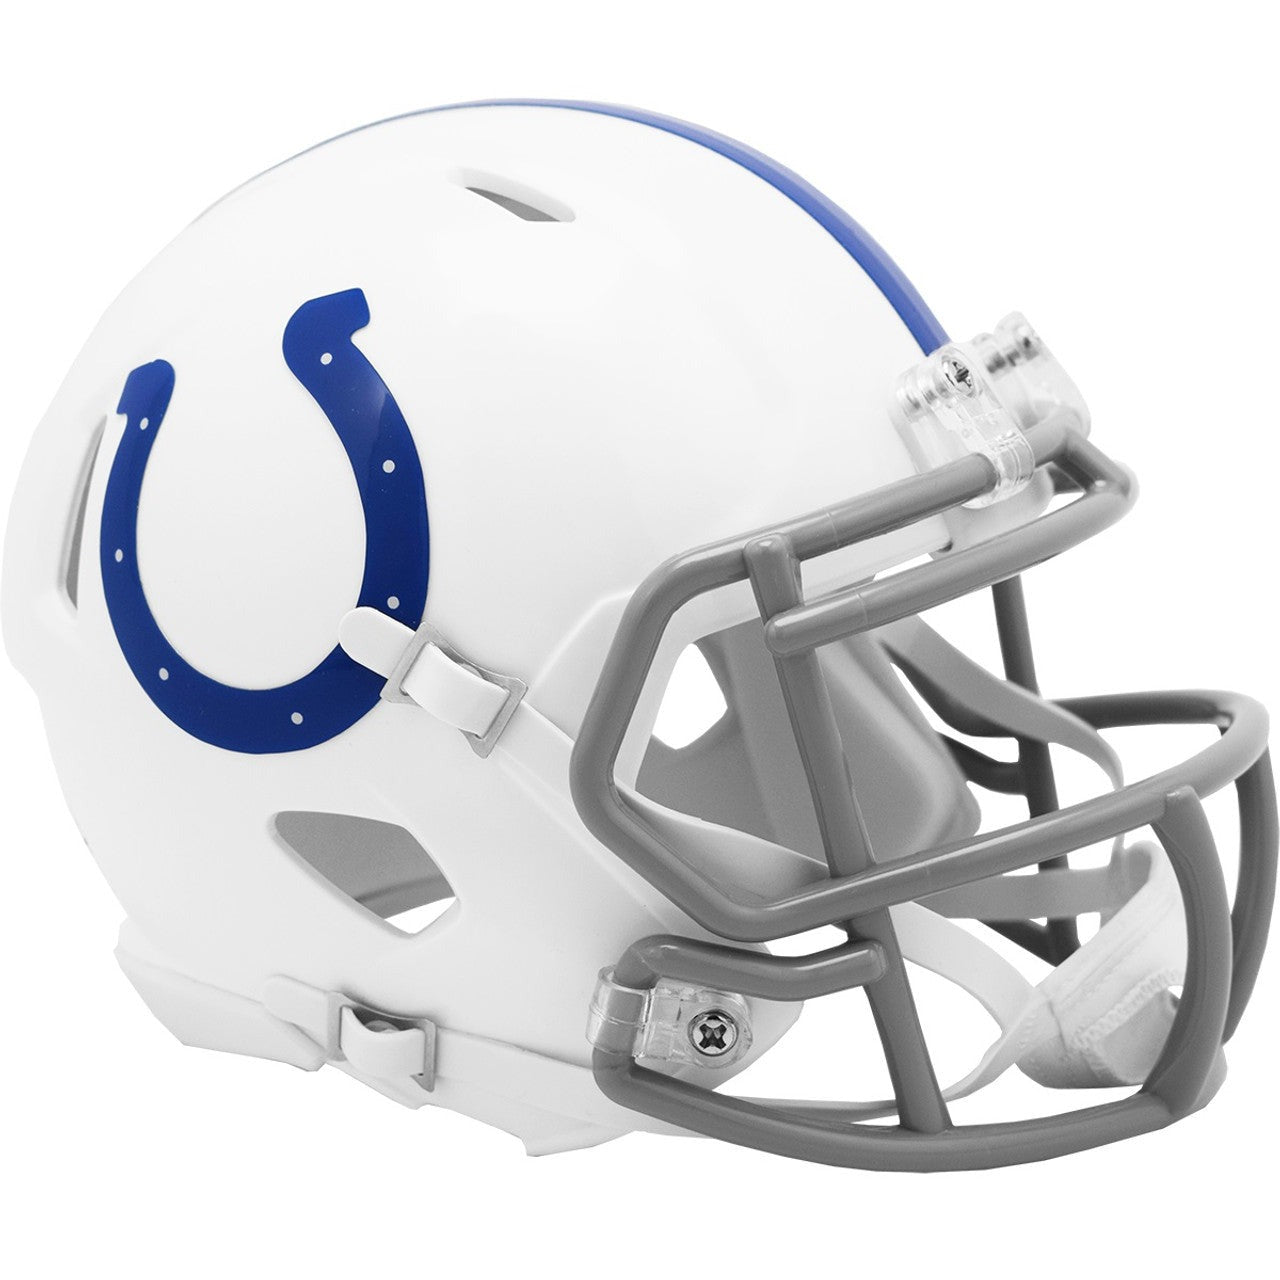 Indianapolis Colts Speed Mini Helmet by Riddell